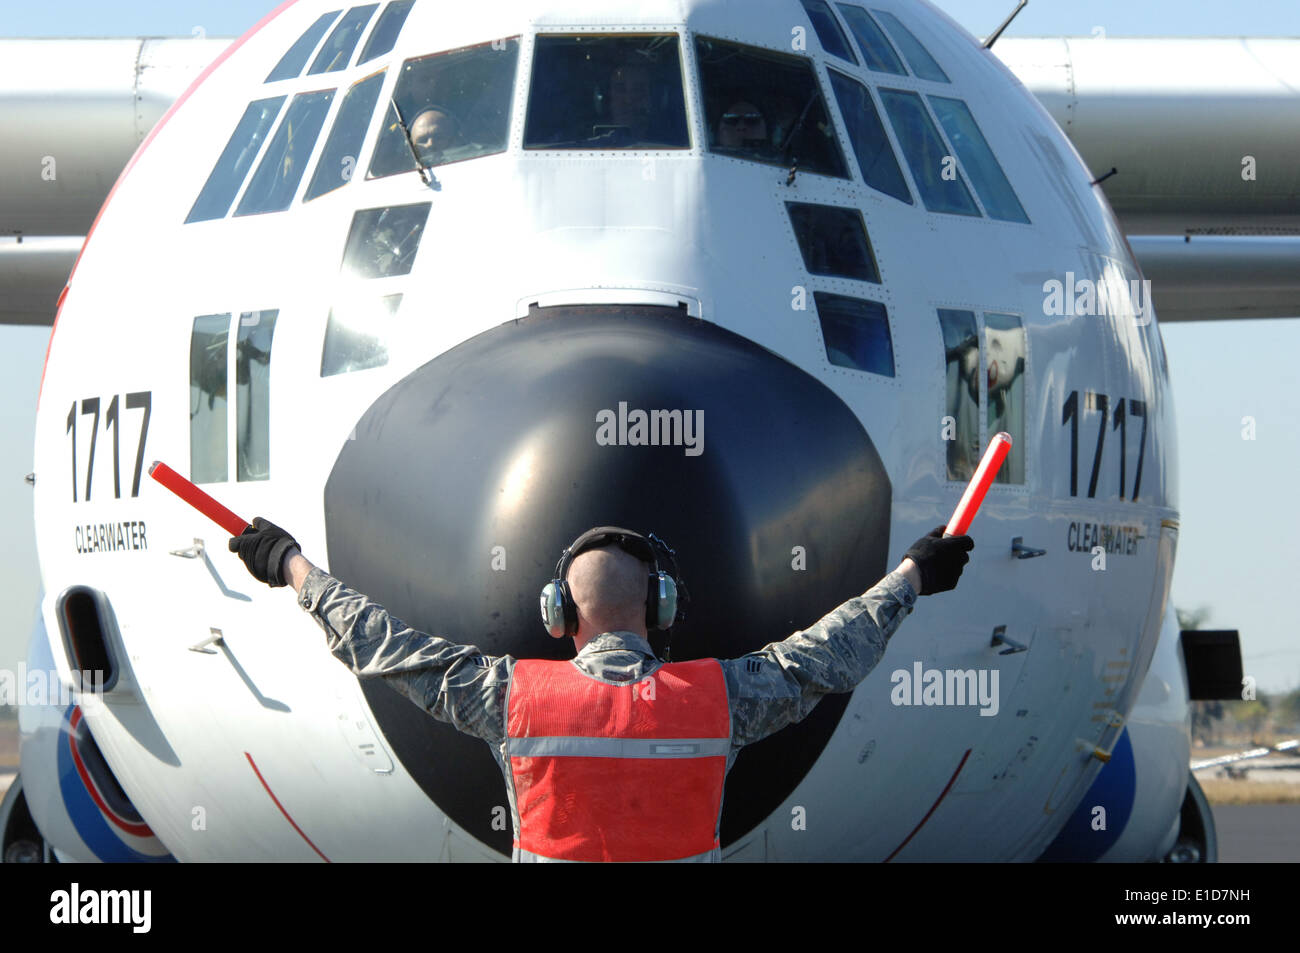 A U.S. Air Force crew chief directs a Coast Guard C-130 on the flight line at Homestead Air Reserve Base, Jan 20, 2010. The a Stock Photo